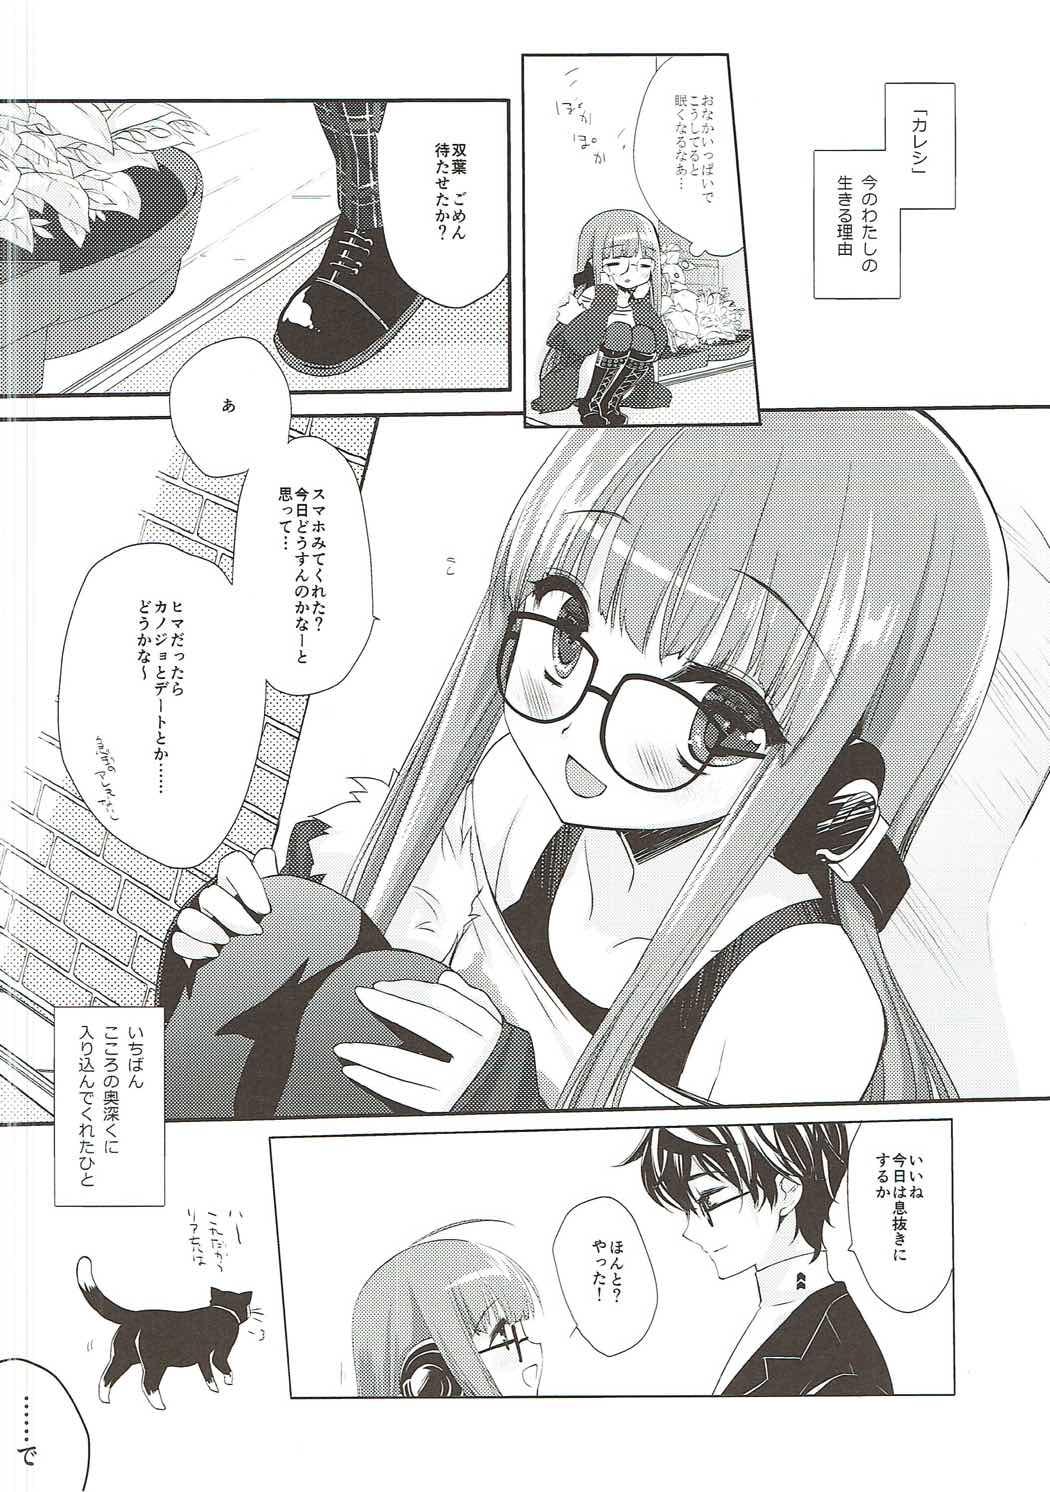 Spit FUTABA REVIVE - Persona 5 Fuck Her Hard - Page 7